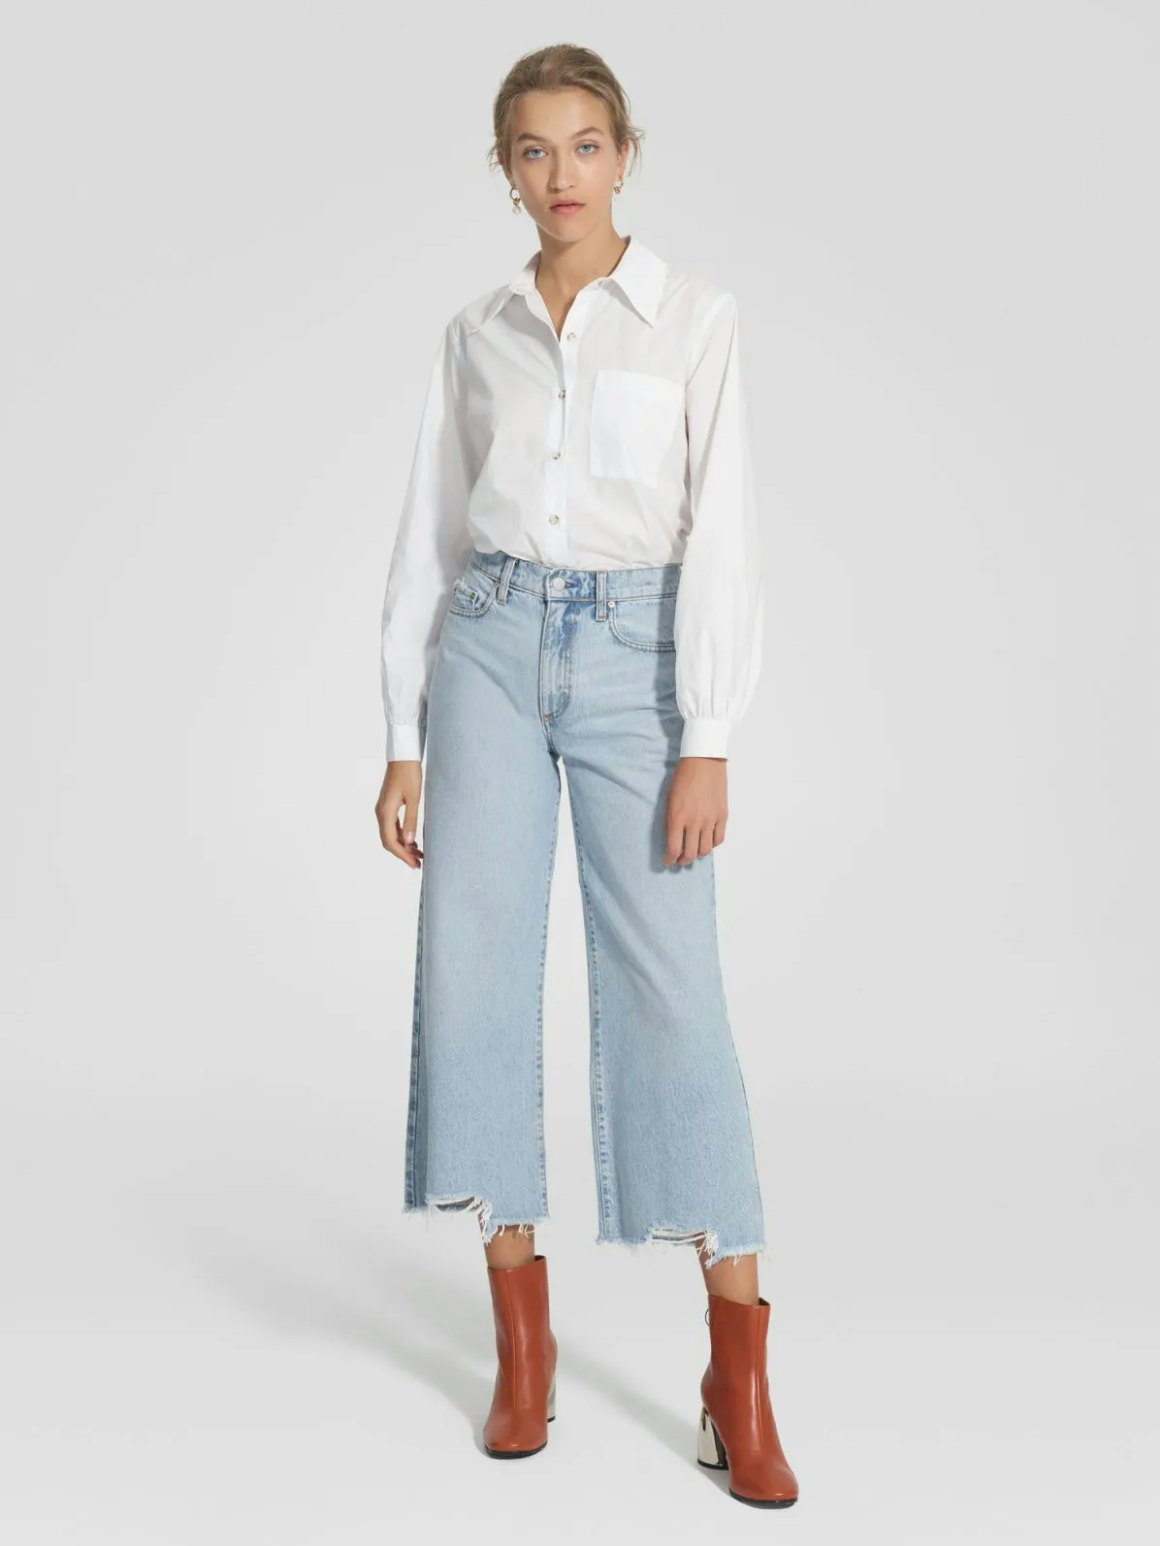 spring 2019 fashion trends jeans